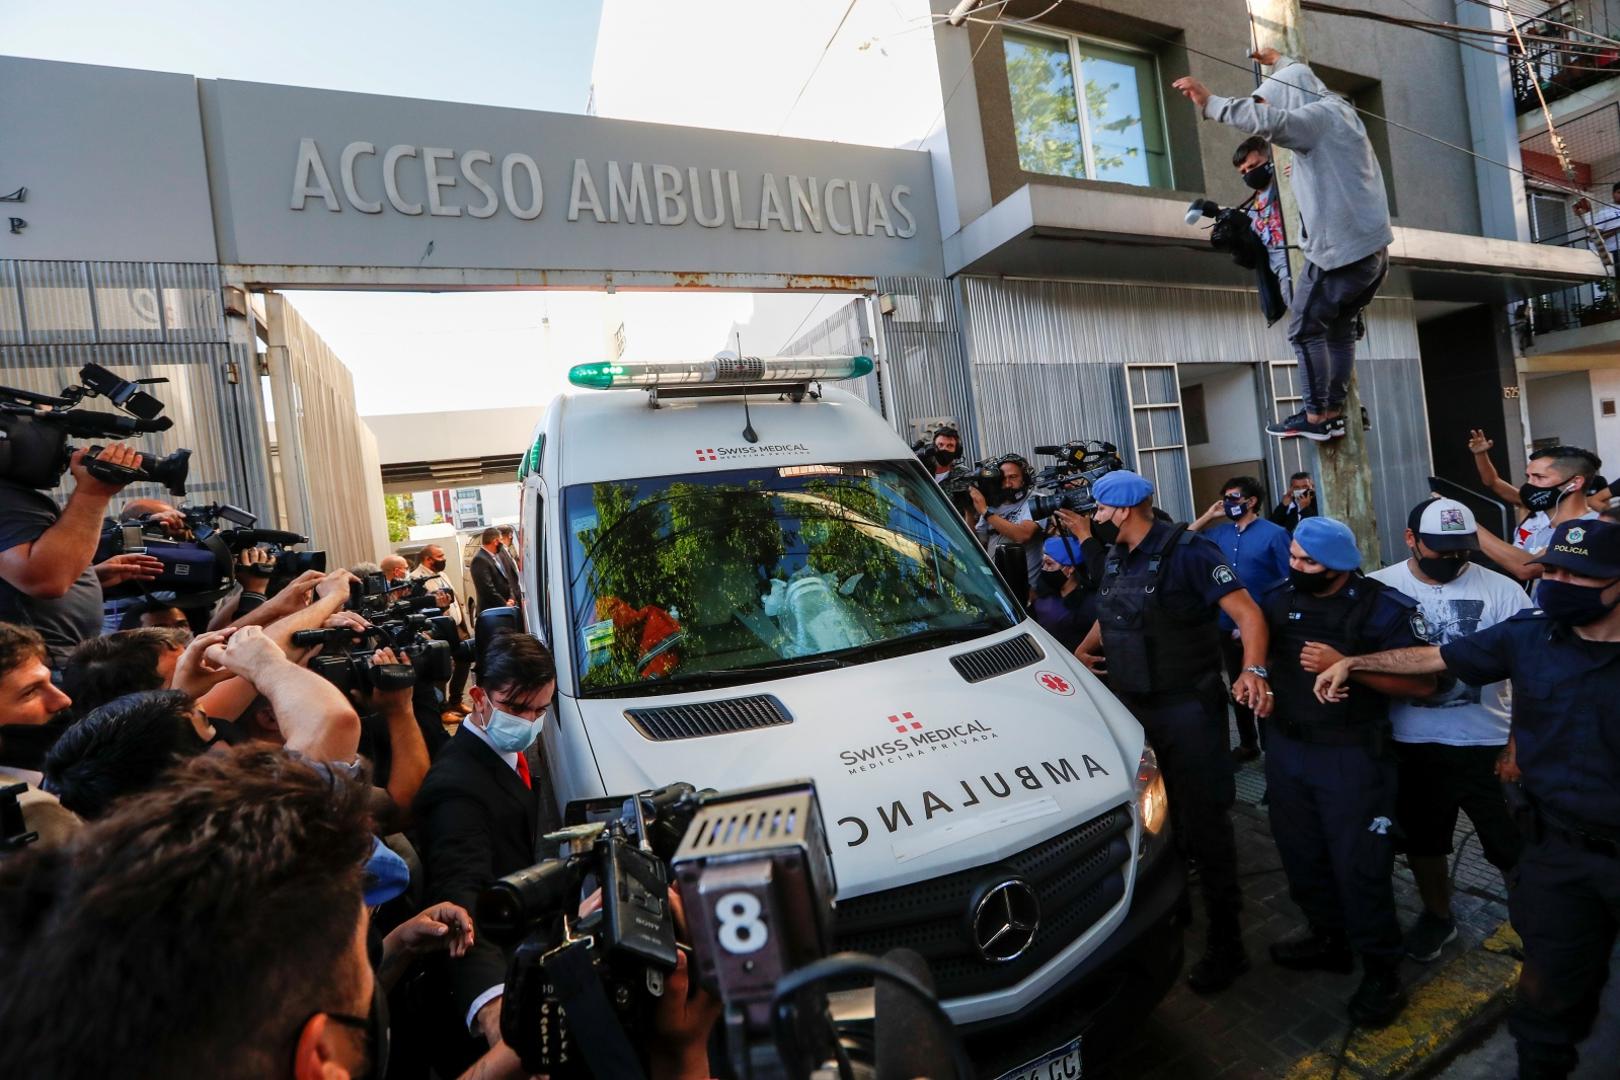 An ambulance carrying Diego Maradona leaves the clinic where Maradona underwent brain surgery, in Olivos An ambulance carrying Argentine soccer great Diego Maradona leaves the clinic where Maradona underwent brain surgery, in Olivos, on the outskirts of Buenos Aires, Argentina November 11, 2020. REUTERS/Agustin Marcarian AGUSTIN MARCARIAN